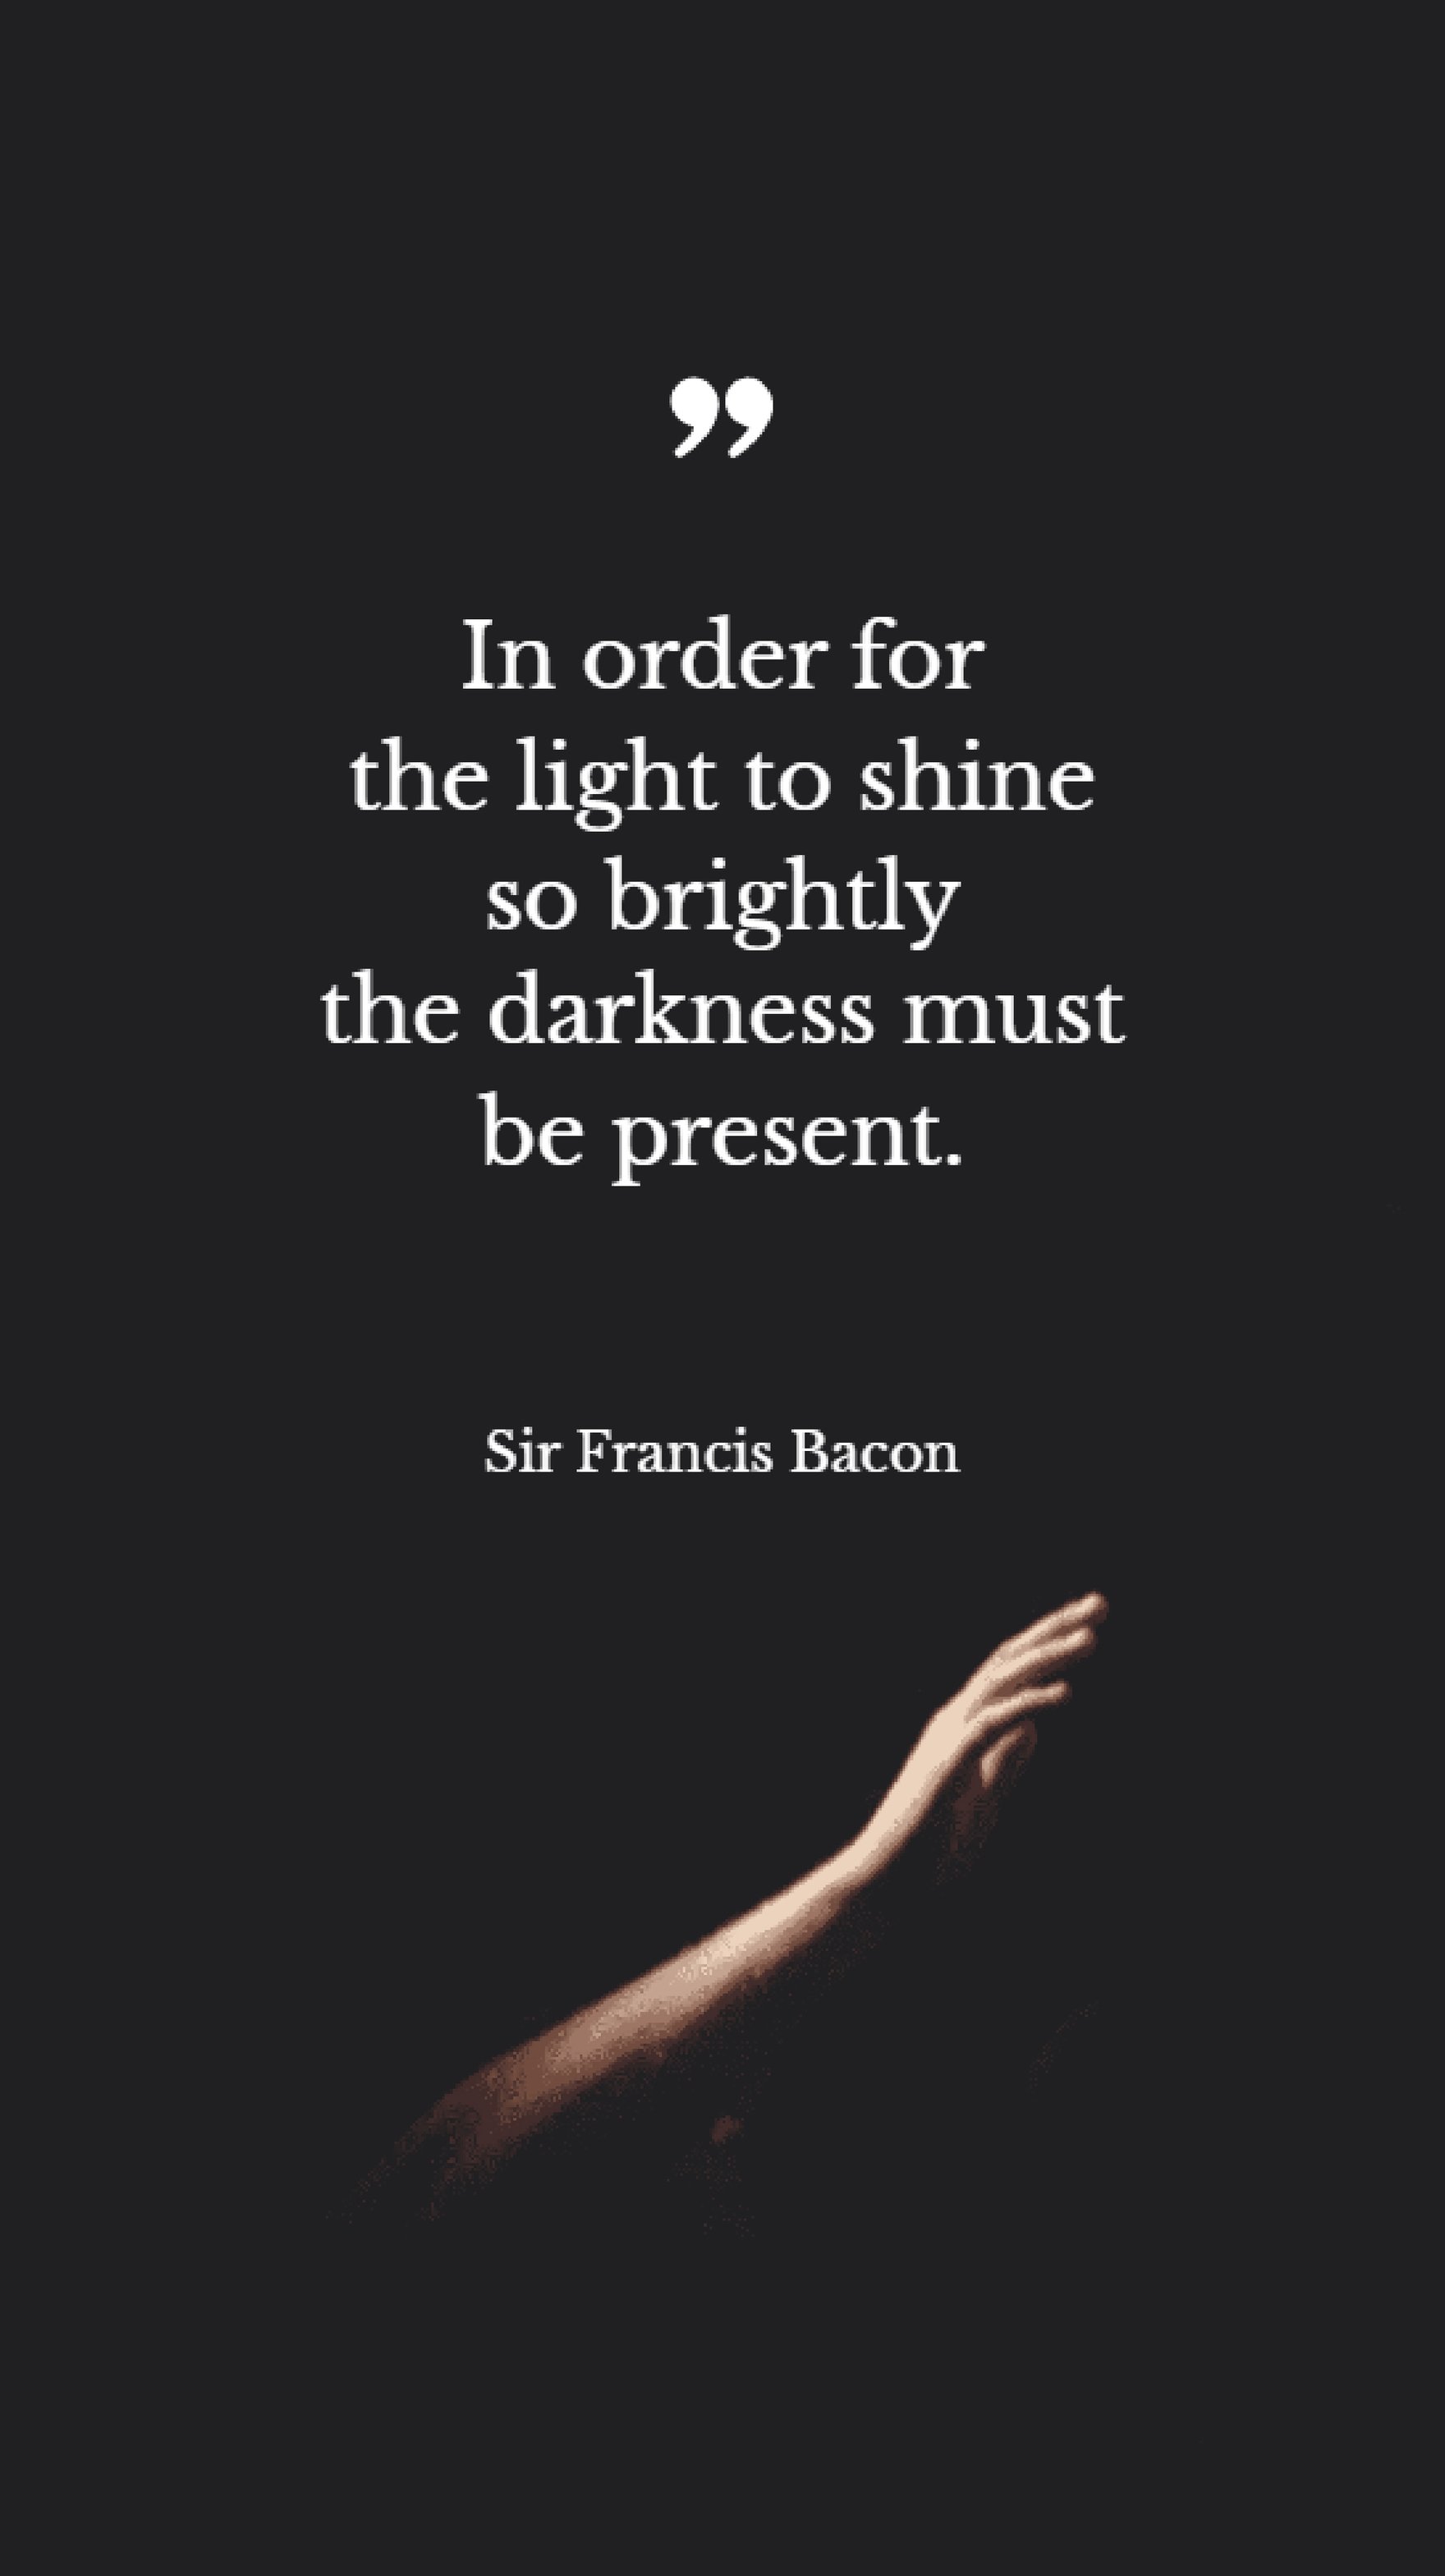 Sir Francis Bacon - In order for the light to shine so brightly the darkness must be present.